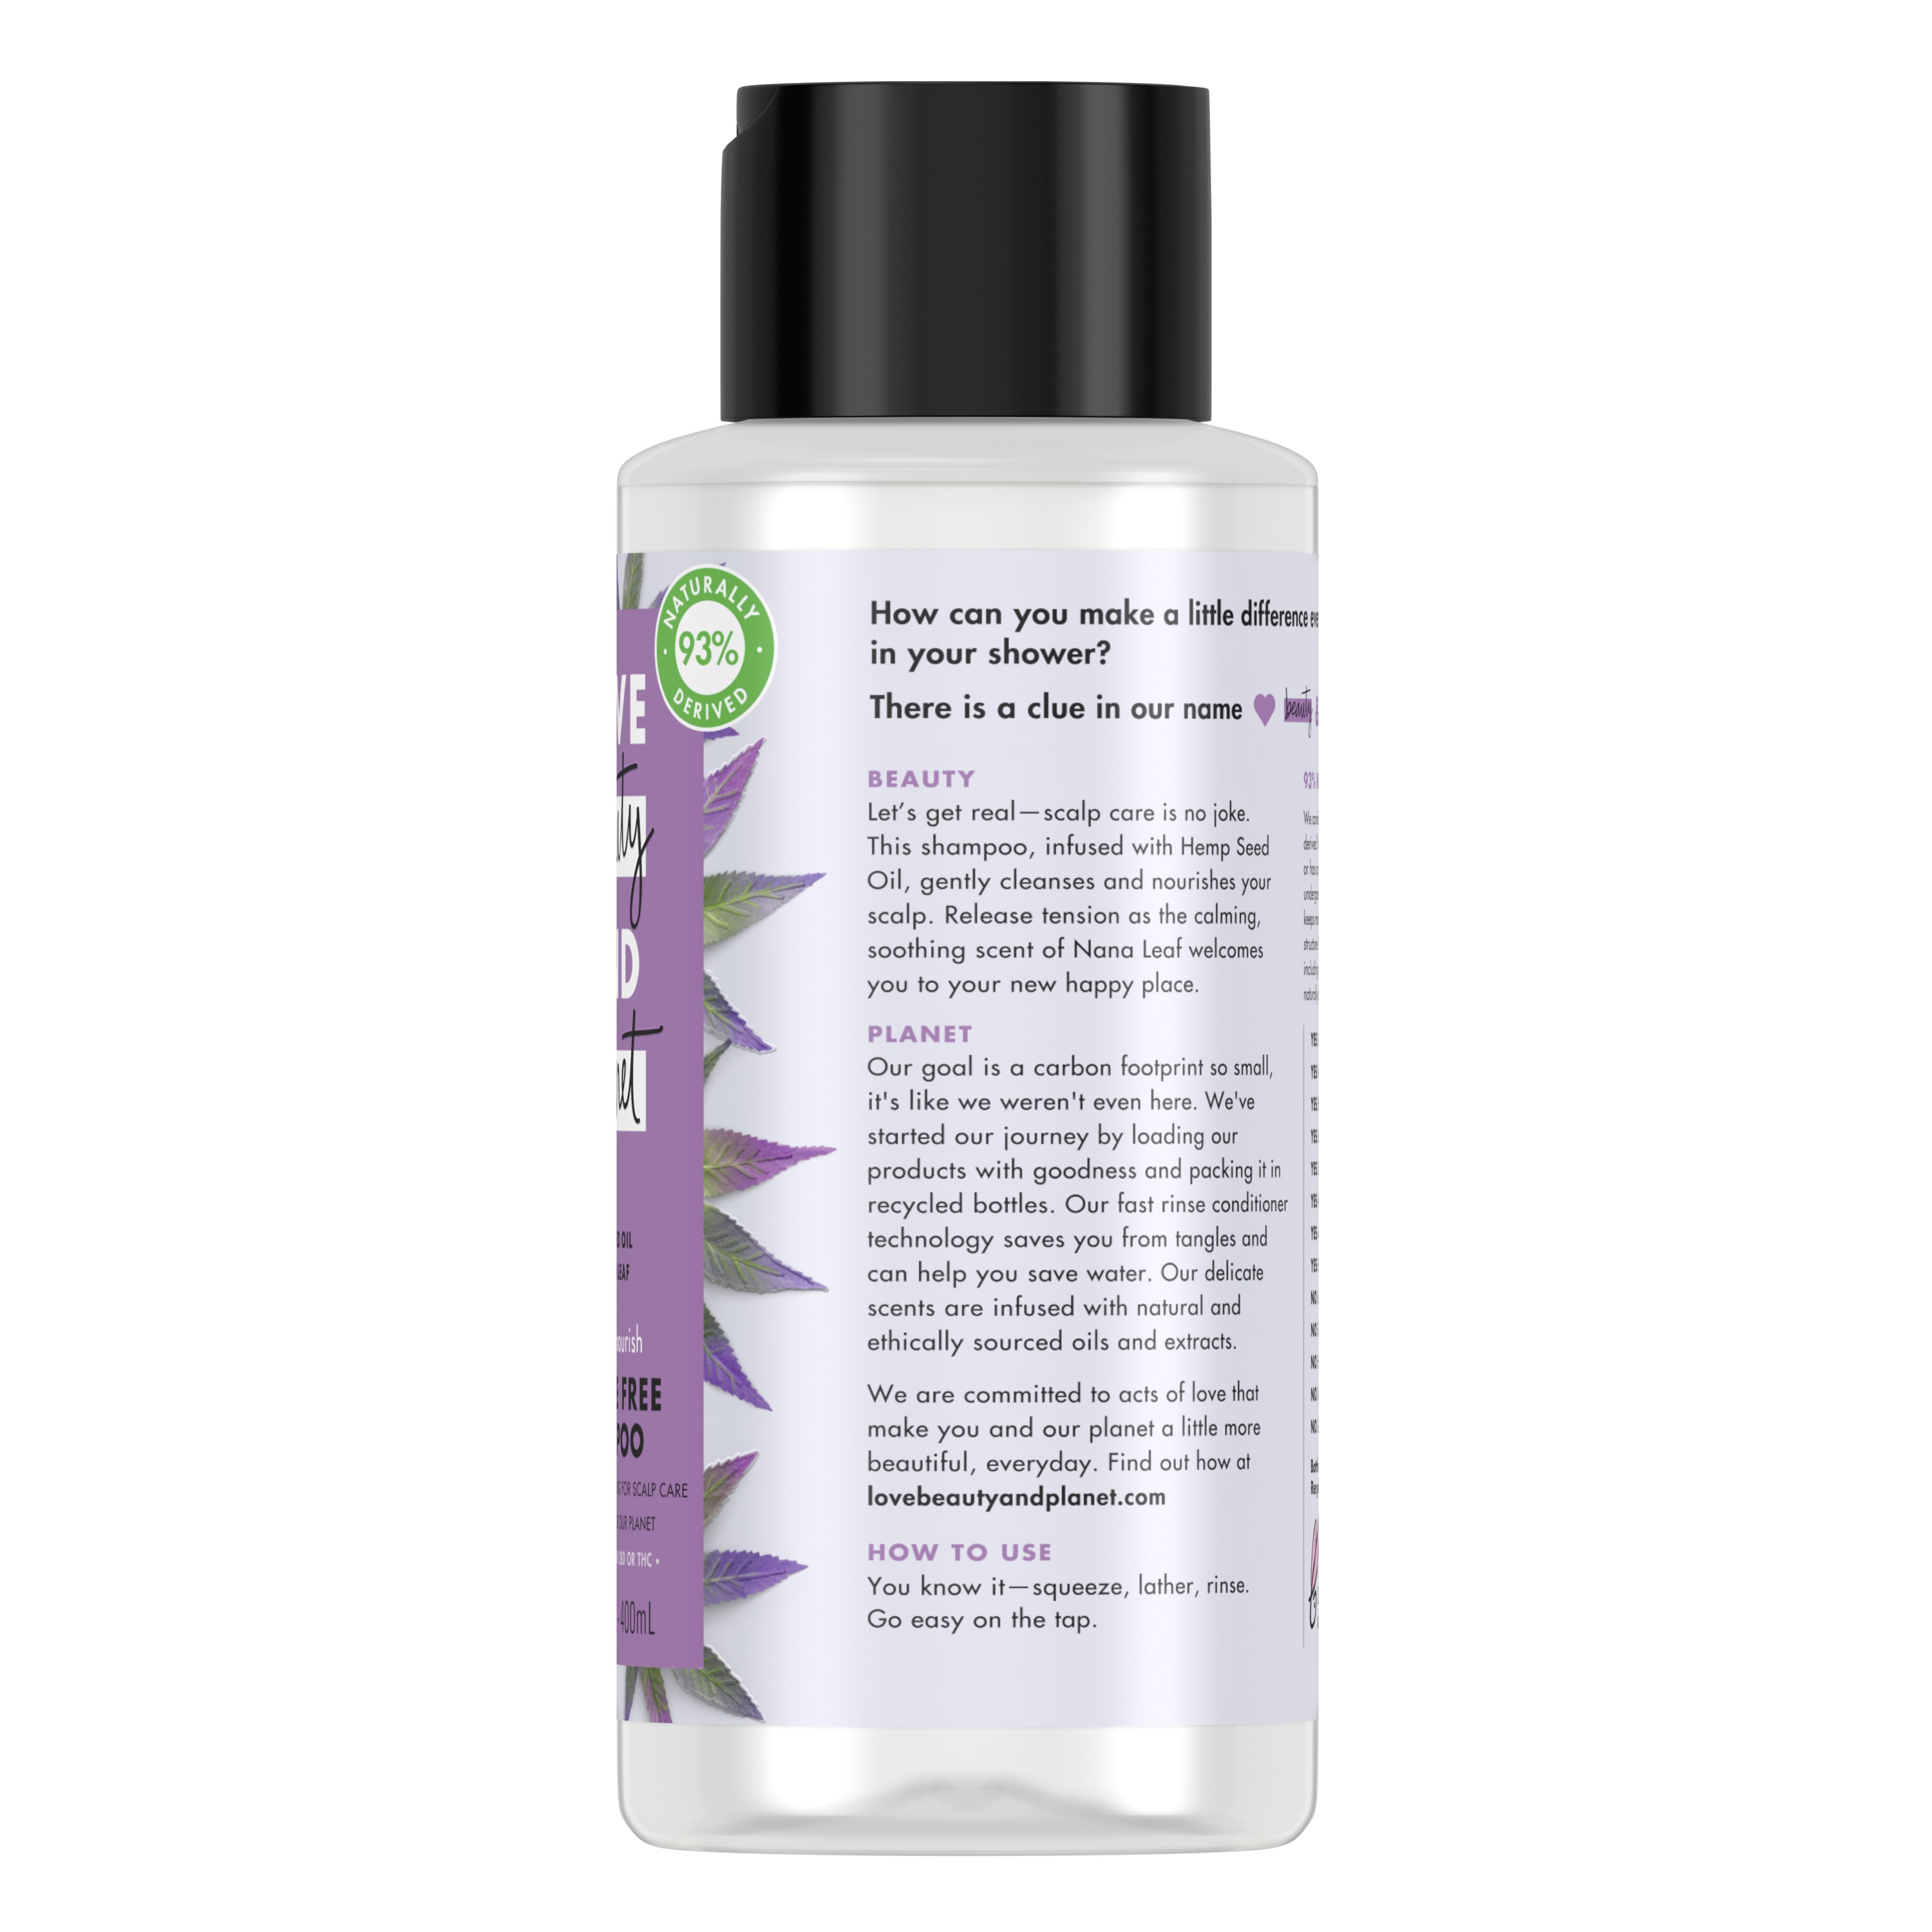 Love Beauty and Planet Soothe & Nourish Sulphate Free Shampoo 13.5 fl oz - image 4 of 7